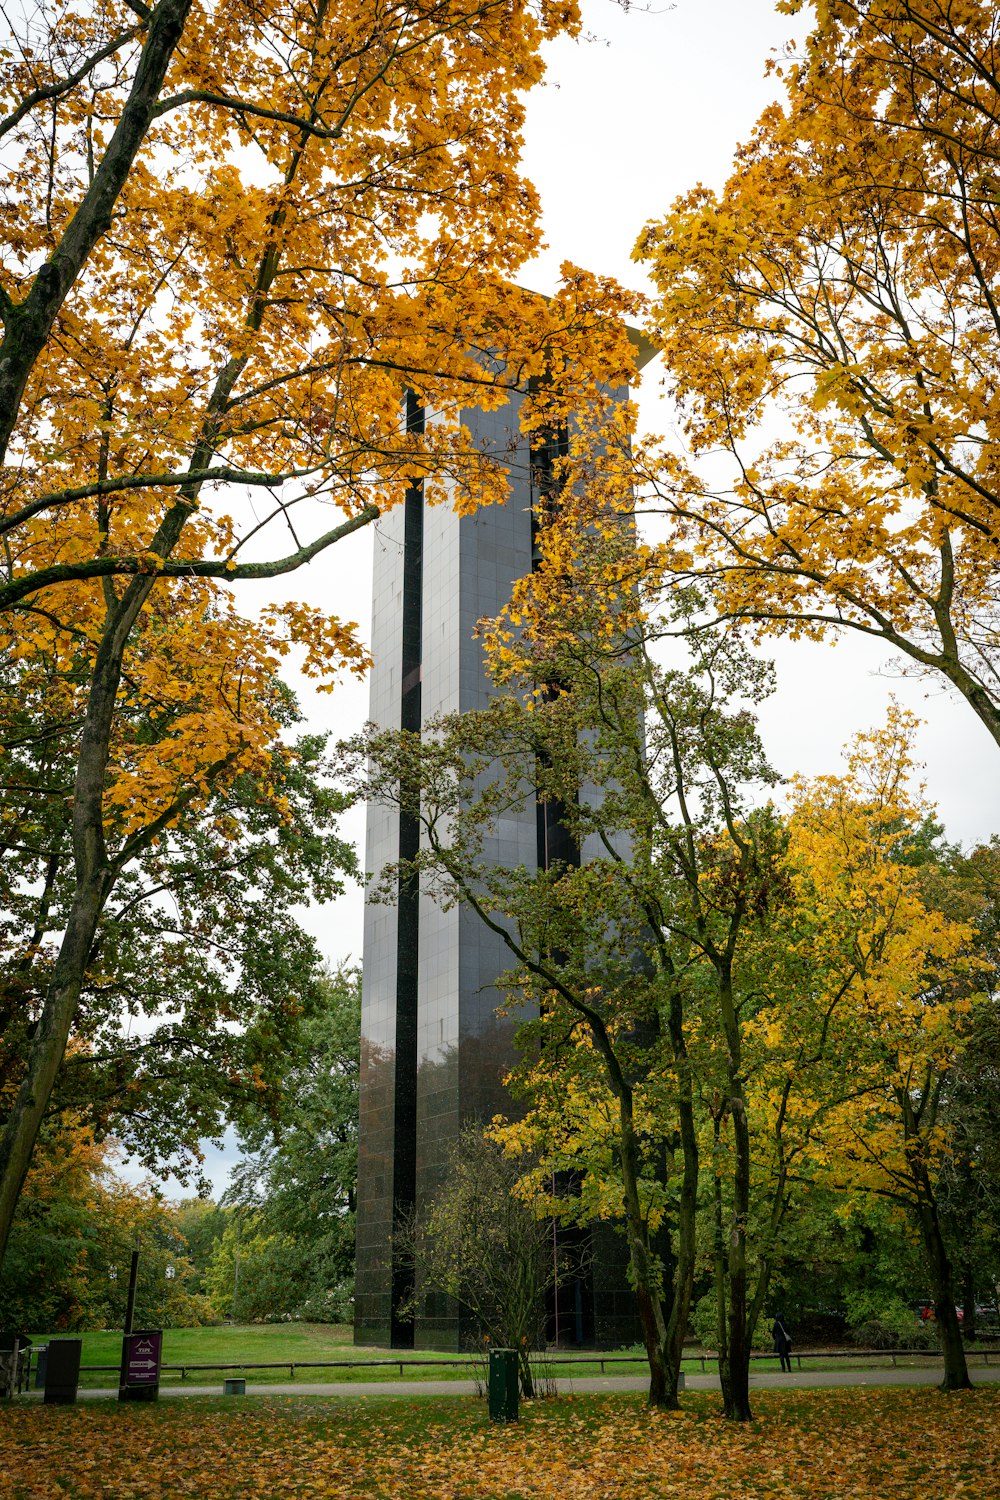 a tall building surrounded by trees with yellow leaves